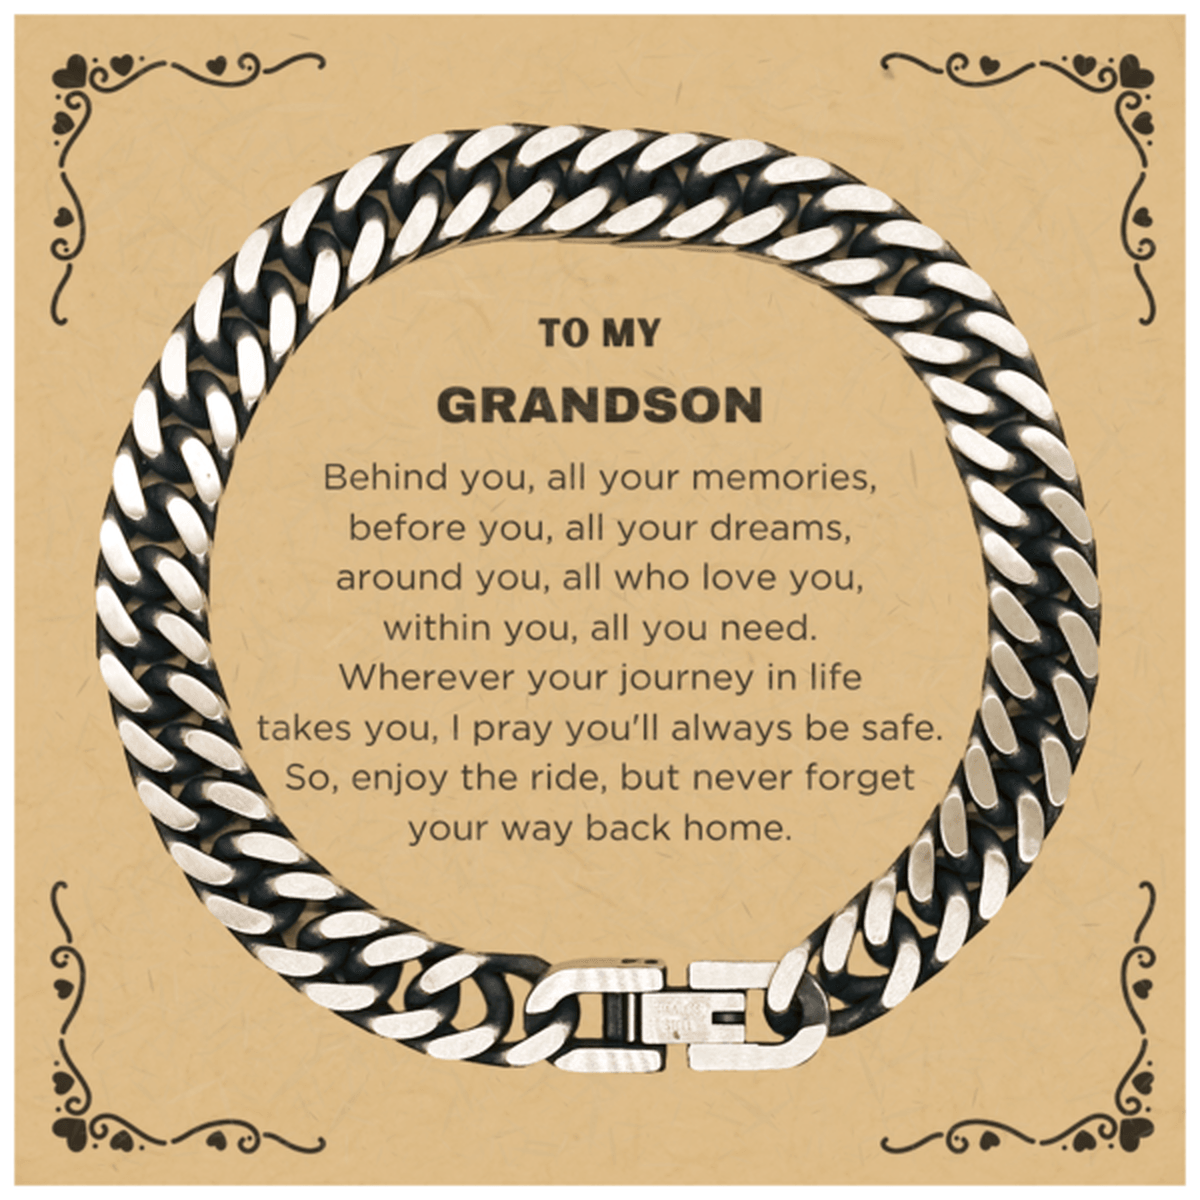 Inspirational Grandson Cuban Link Chain Bracelet - Behind you, all your Memories, Before you, all your Dreams - Birthday, Christmas Holiday Gifts - Mallard Moon Gift Shop